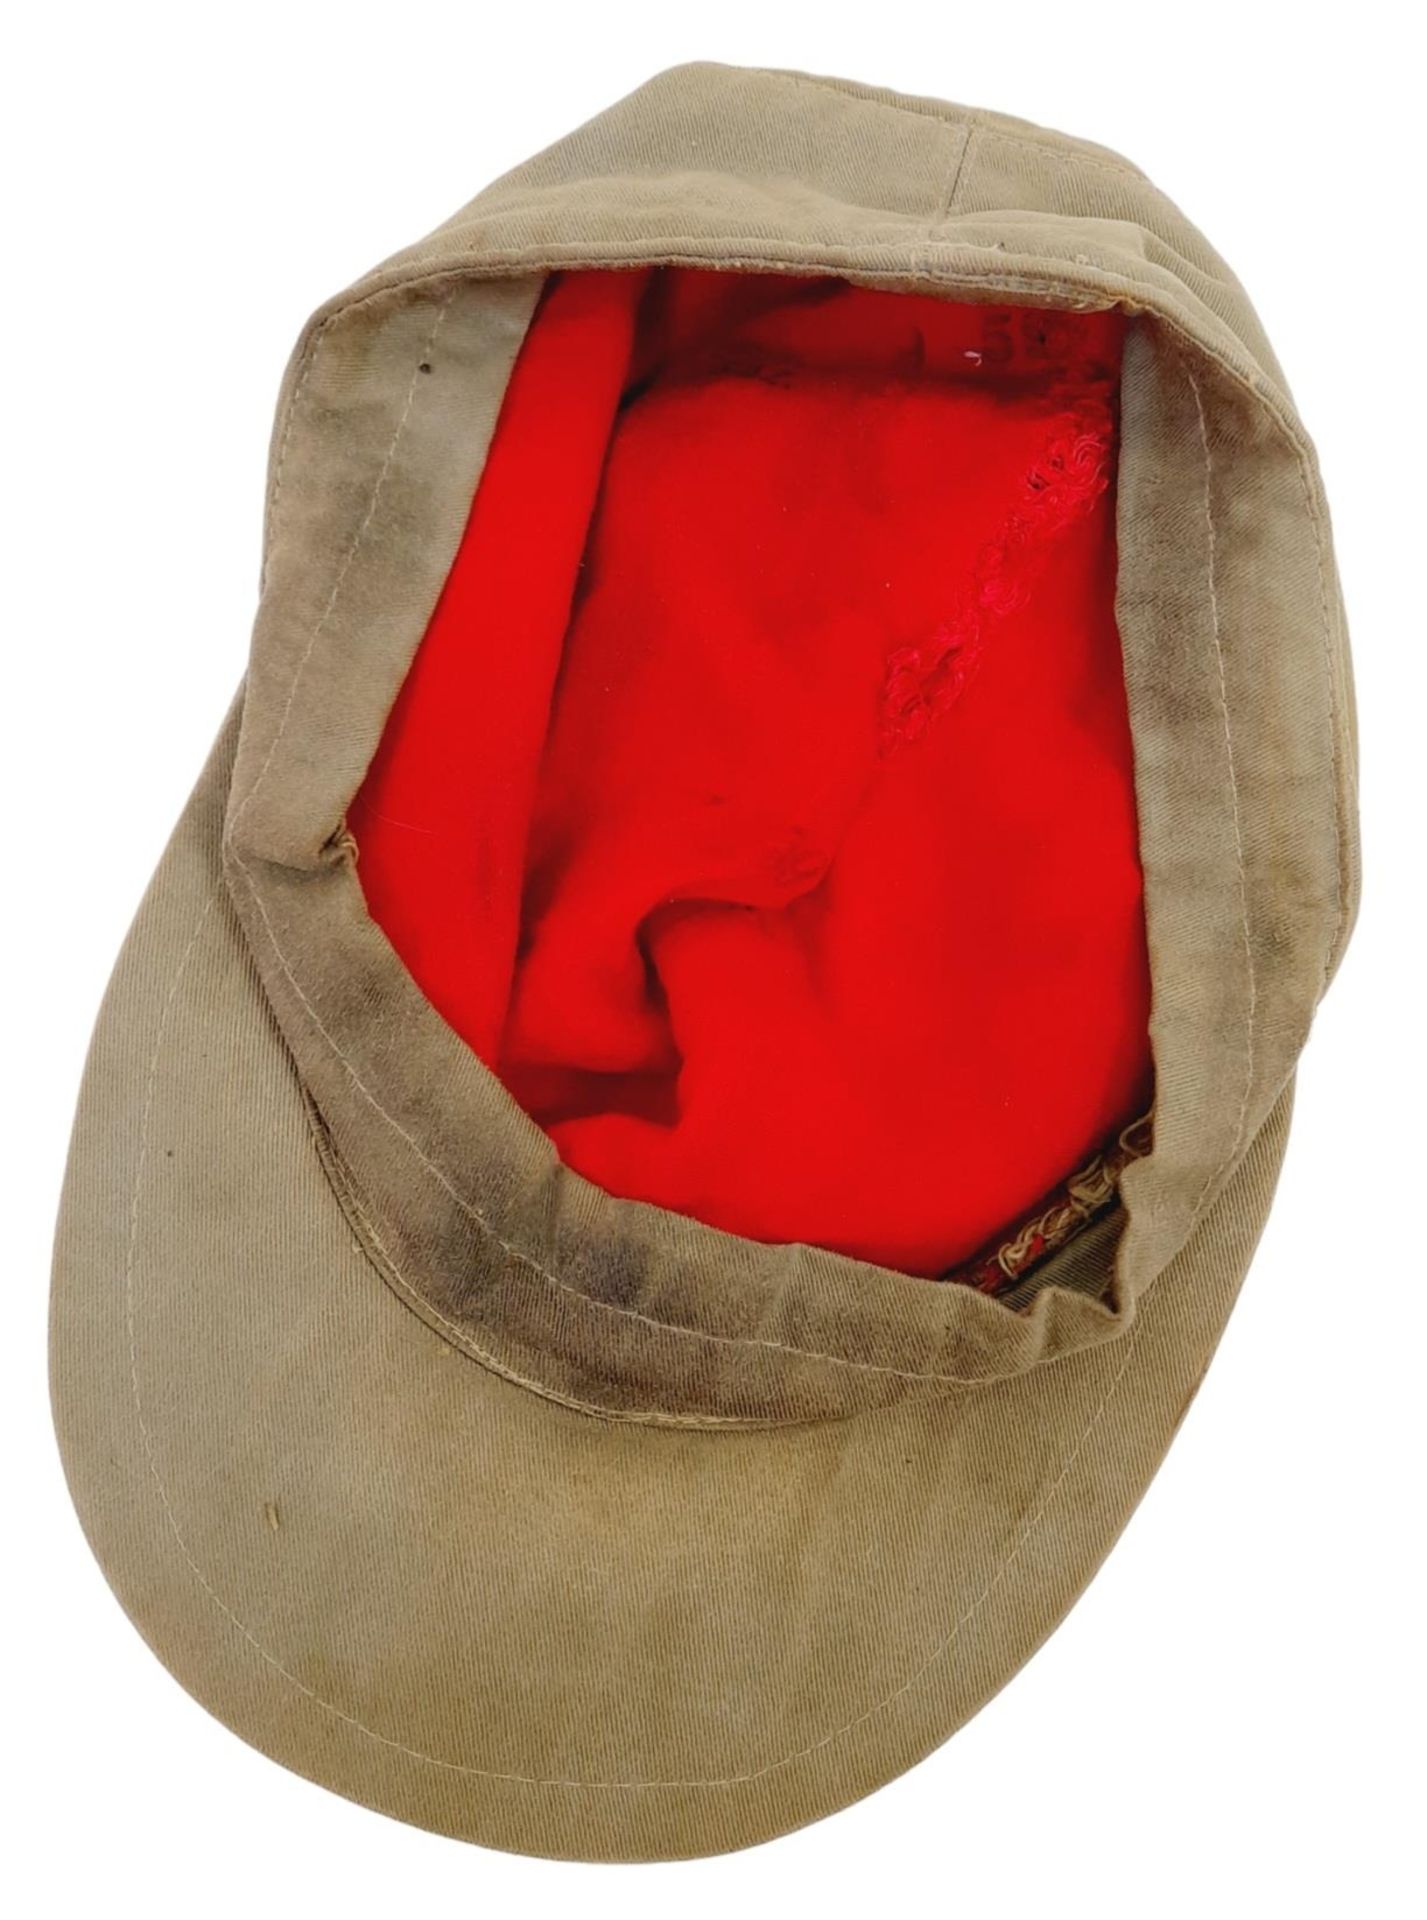 In Country Made Lightweight Africa Corps Artillery Cap. (No Vents) This is a typical example of a - Image 5 of 6